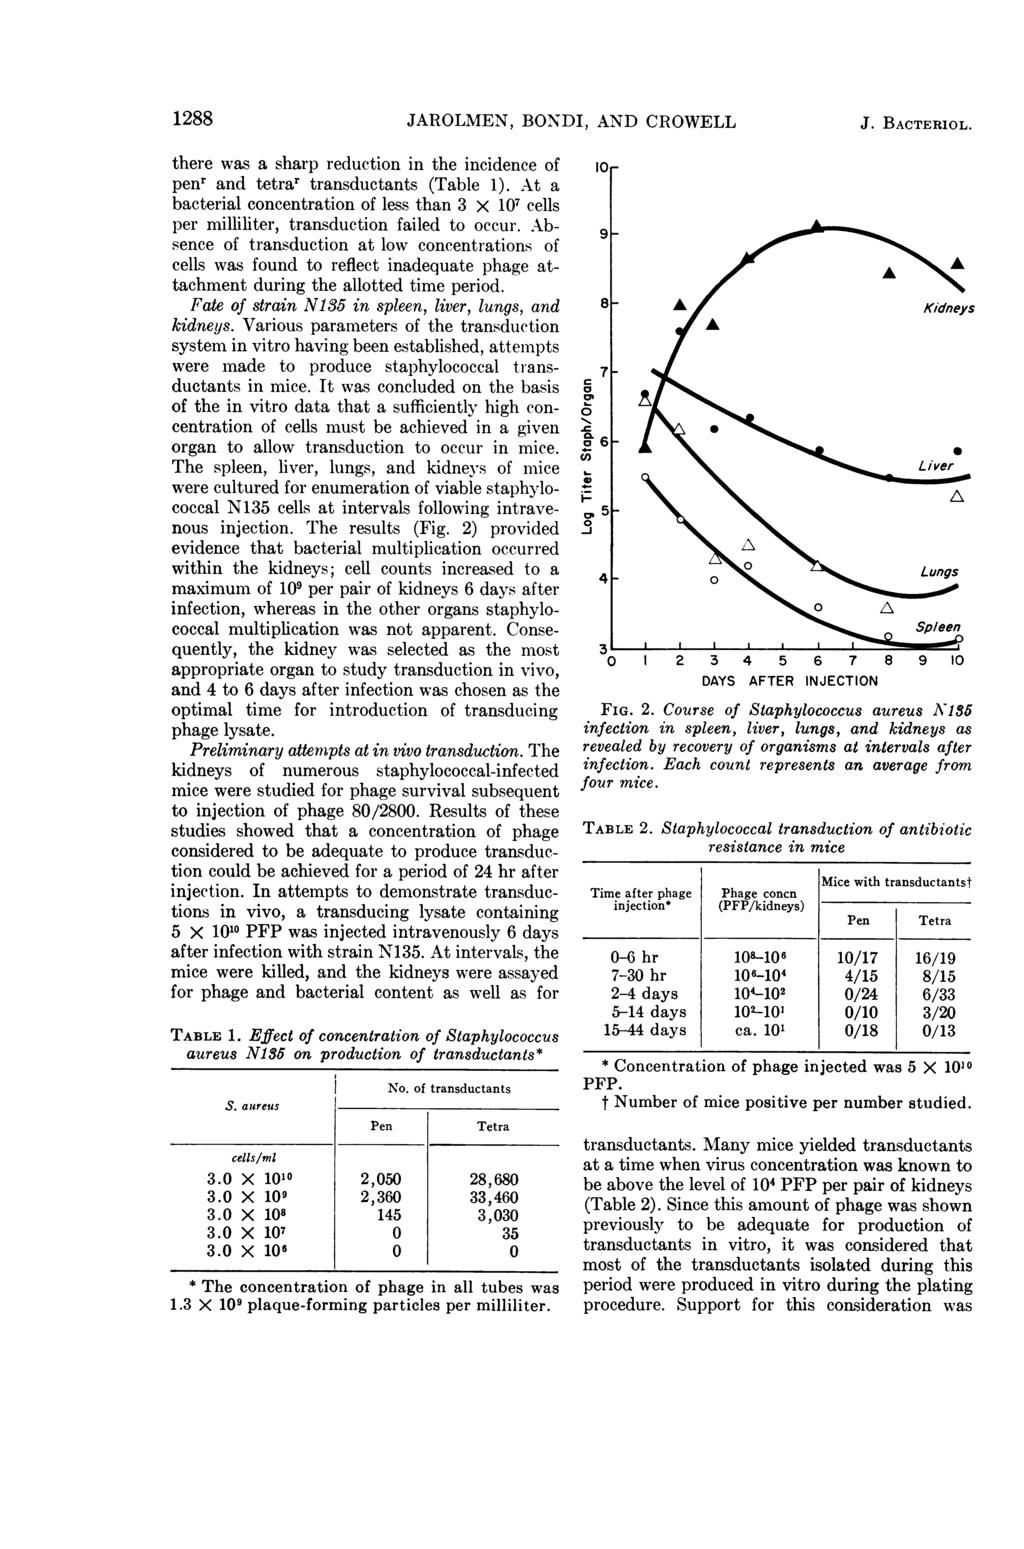 1288 JAROLMEN, BONDI, AND CROWELL J. BACTERIOL. there was a sharp reduction in the incidence of penr and tetrar transductants (Table 1).